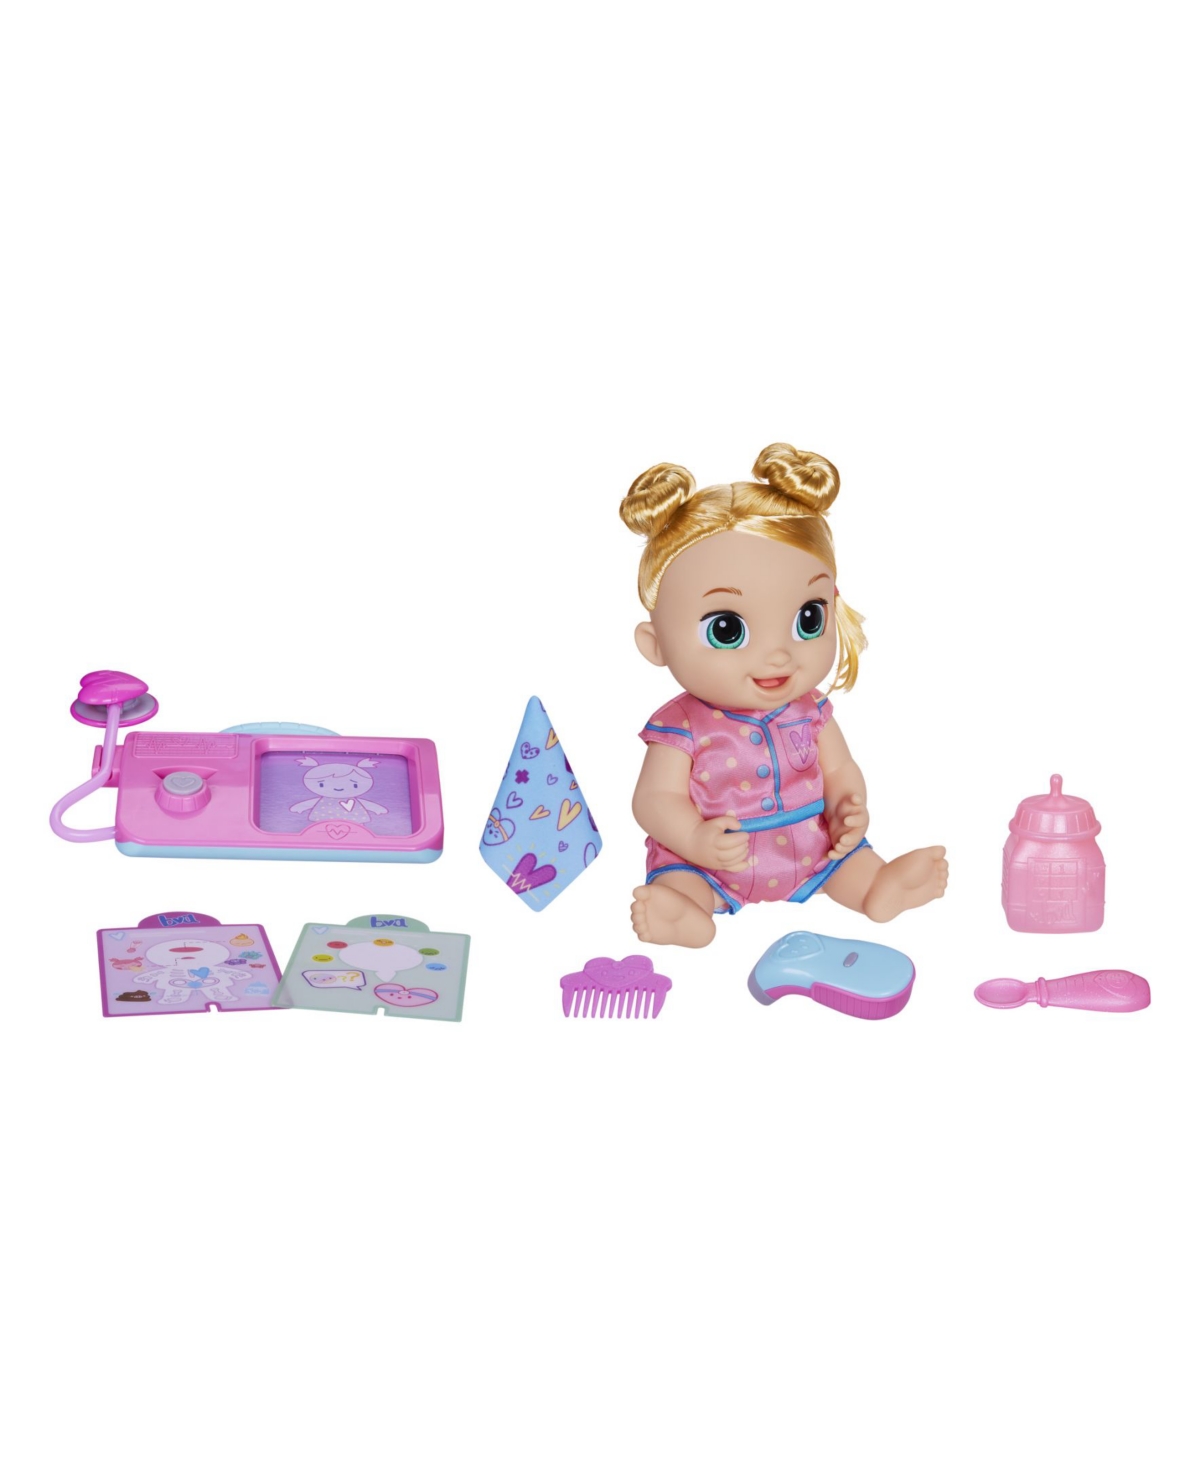 EAN 5010993871124 product image for Baby Alive Lulu Achoo Doll | upcitemdb.com